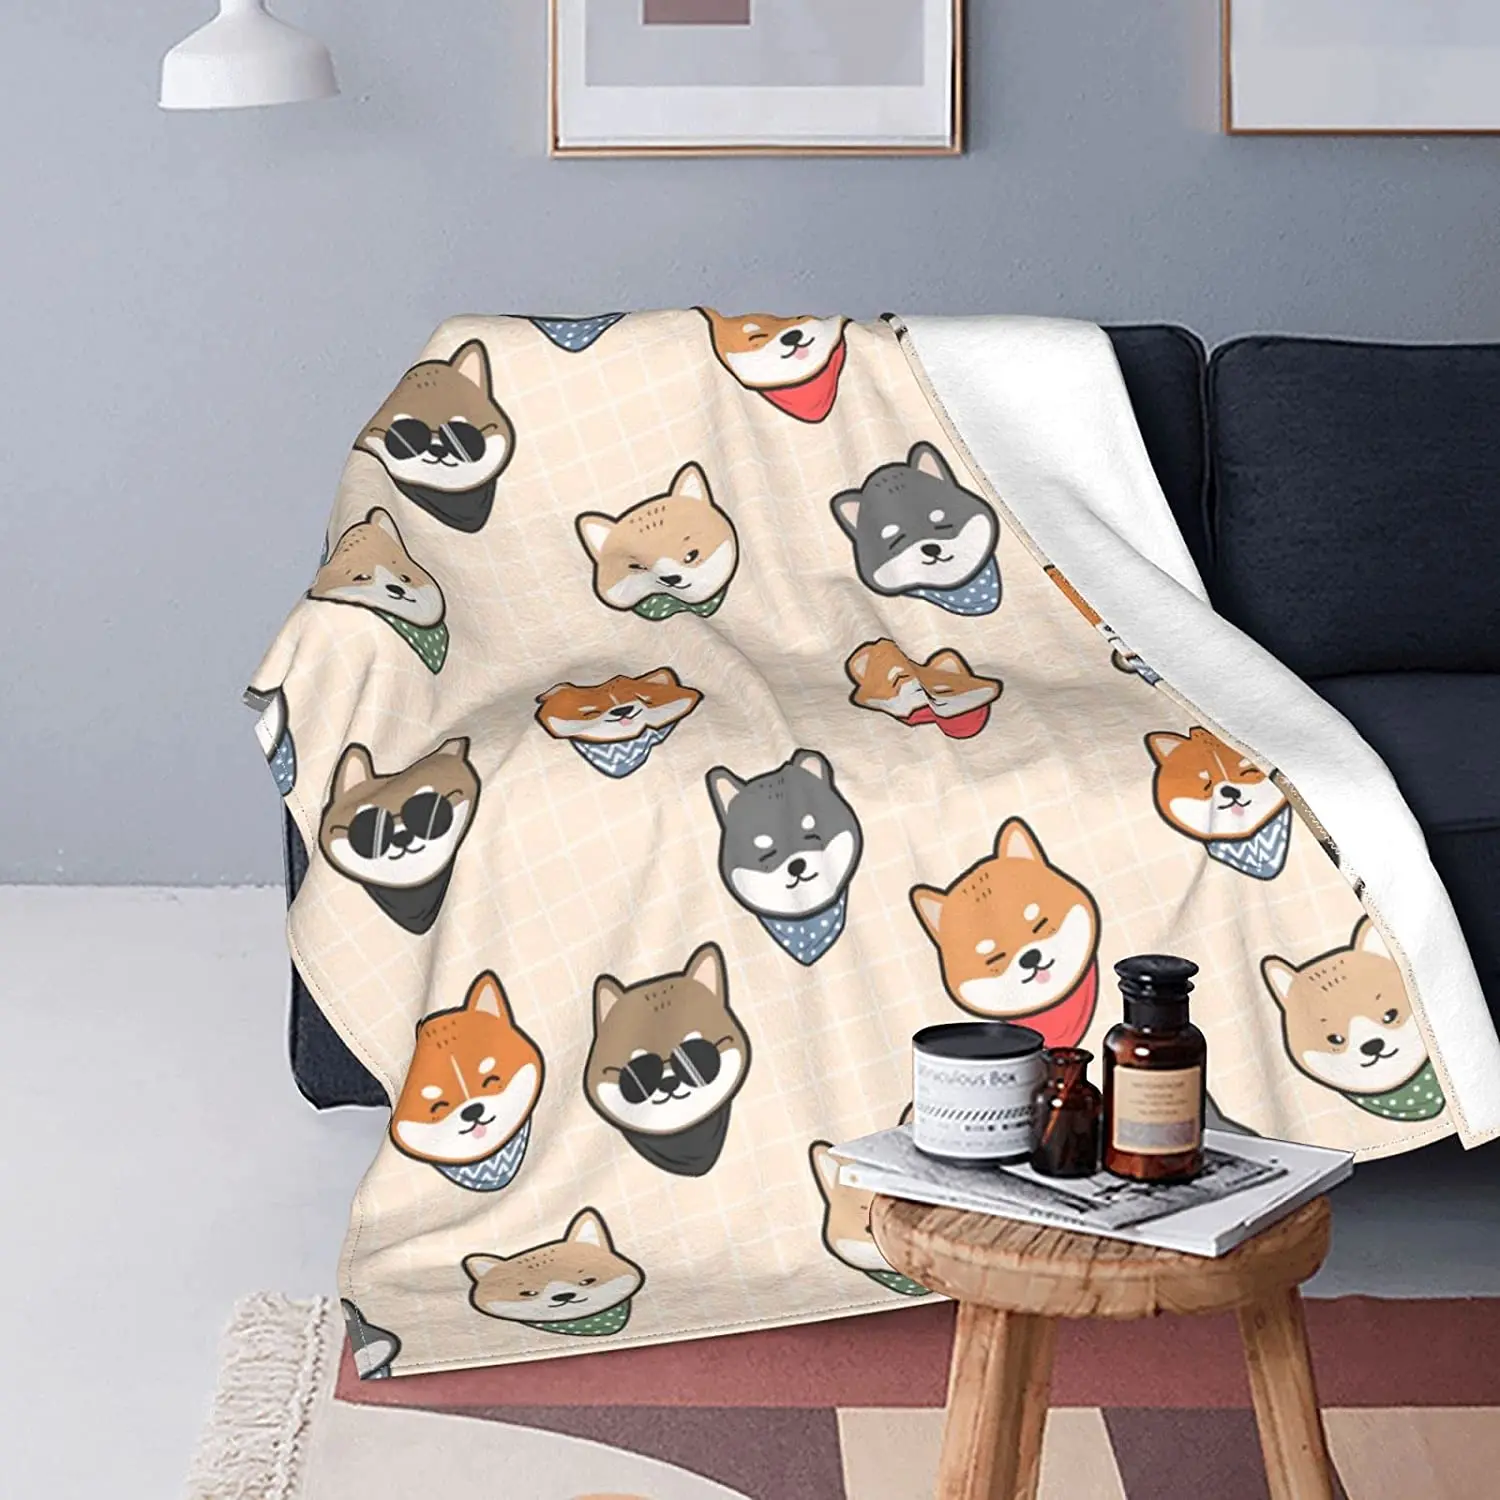 

3D Printed Cute Shiba Inu Japanese Dog Soft Blanket Lightweight Flannel Fleece Blanket for Sofa Bed Travel Camping All Seasons